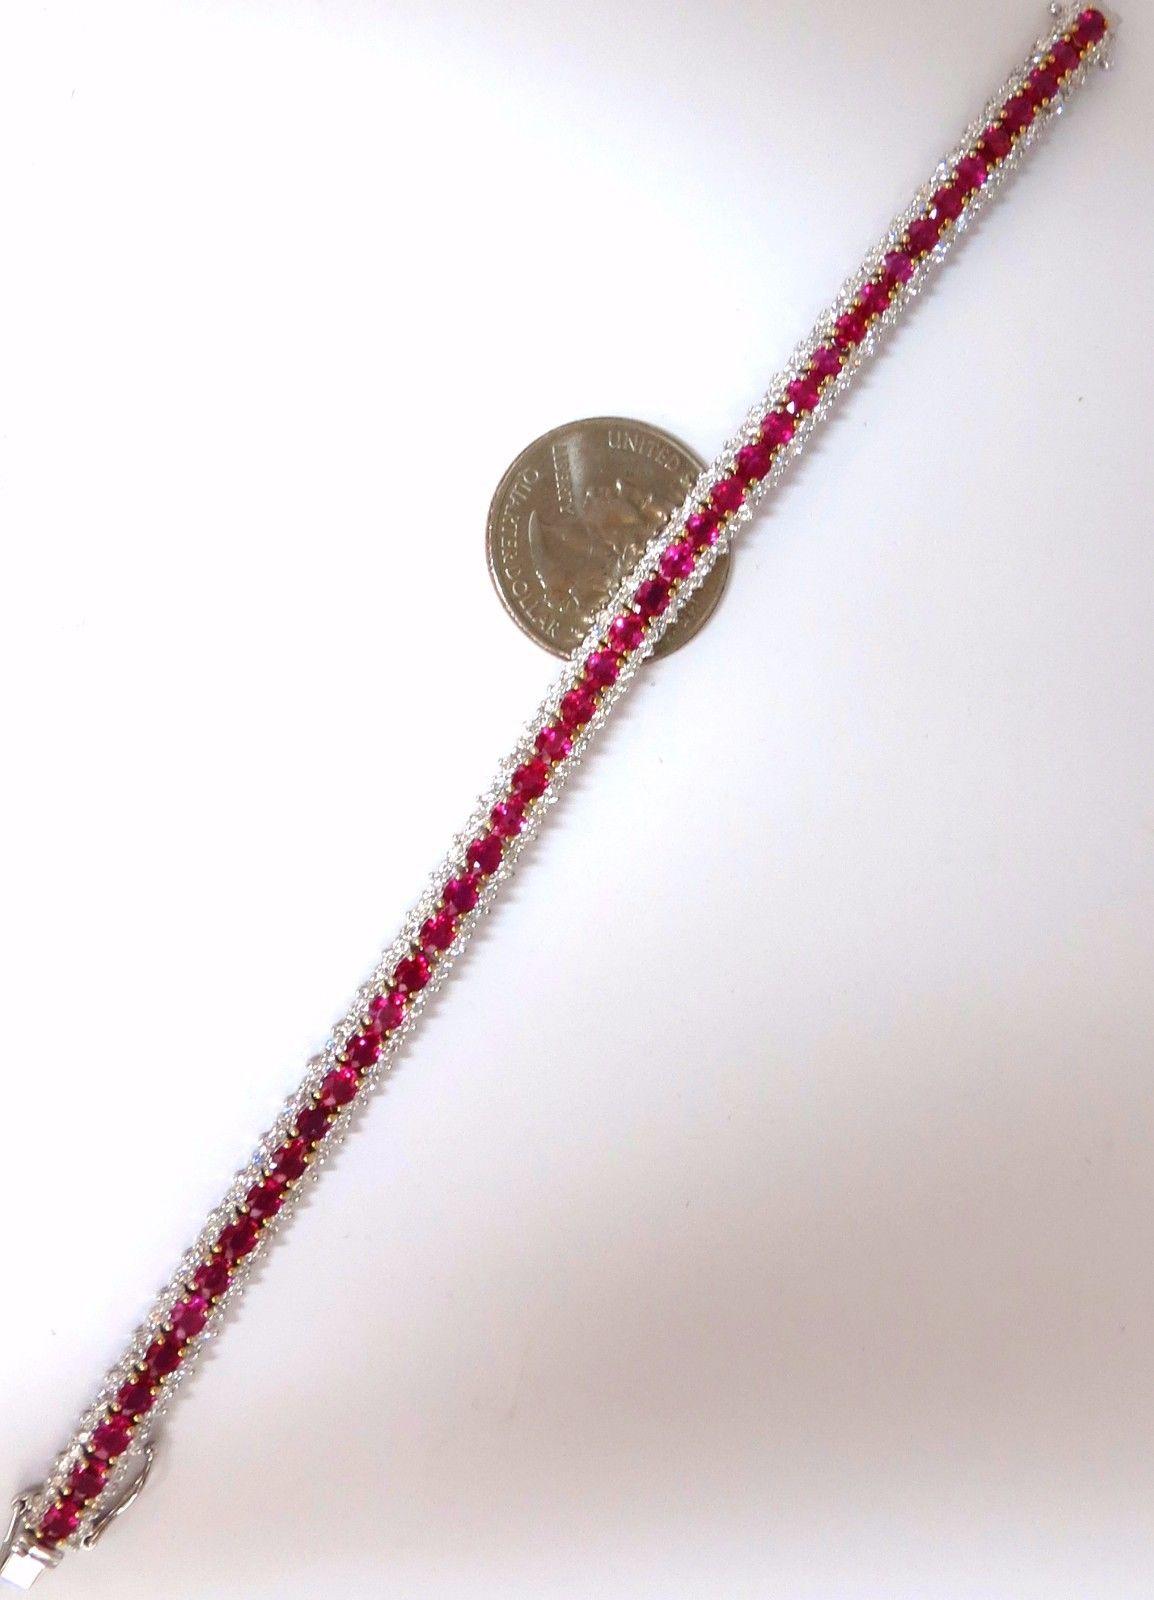 13.81 Carat Bright Vivid Red Natural Ruby Tennis Bracelet 14 Karat Three-Row In New Condition For Sale In New York, NY